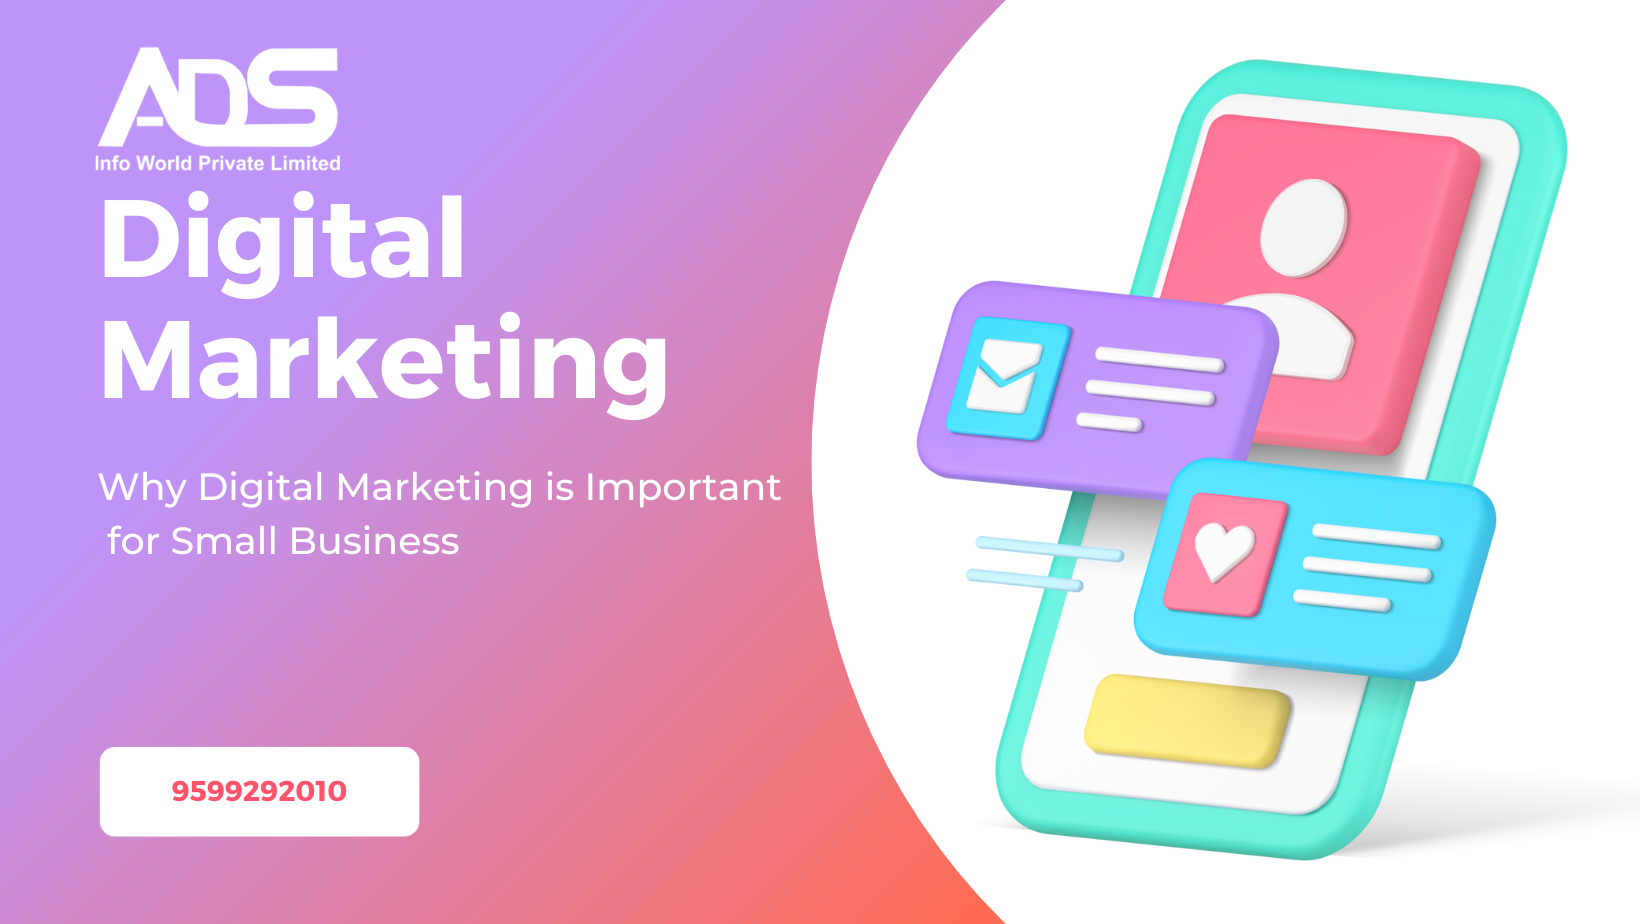 Why Digital Marketing is Important for Small Business